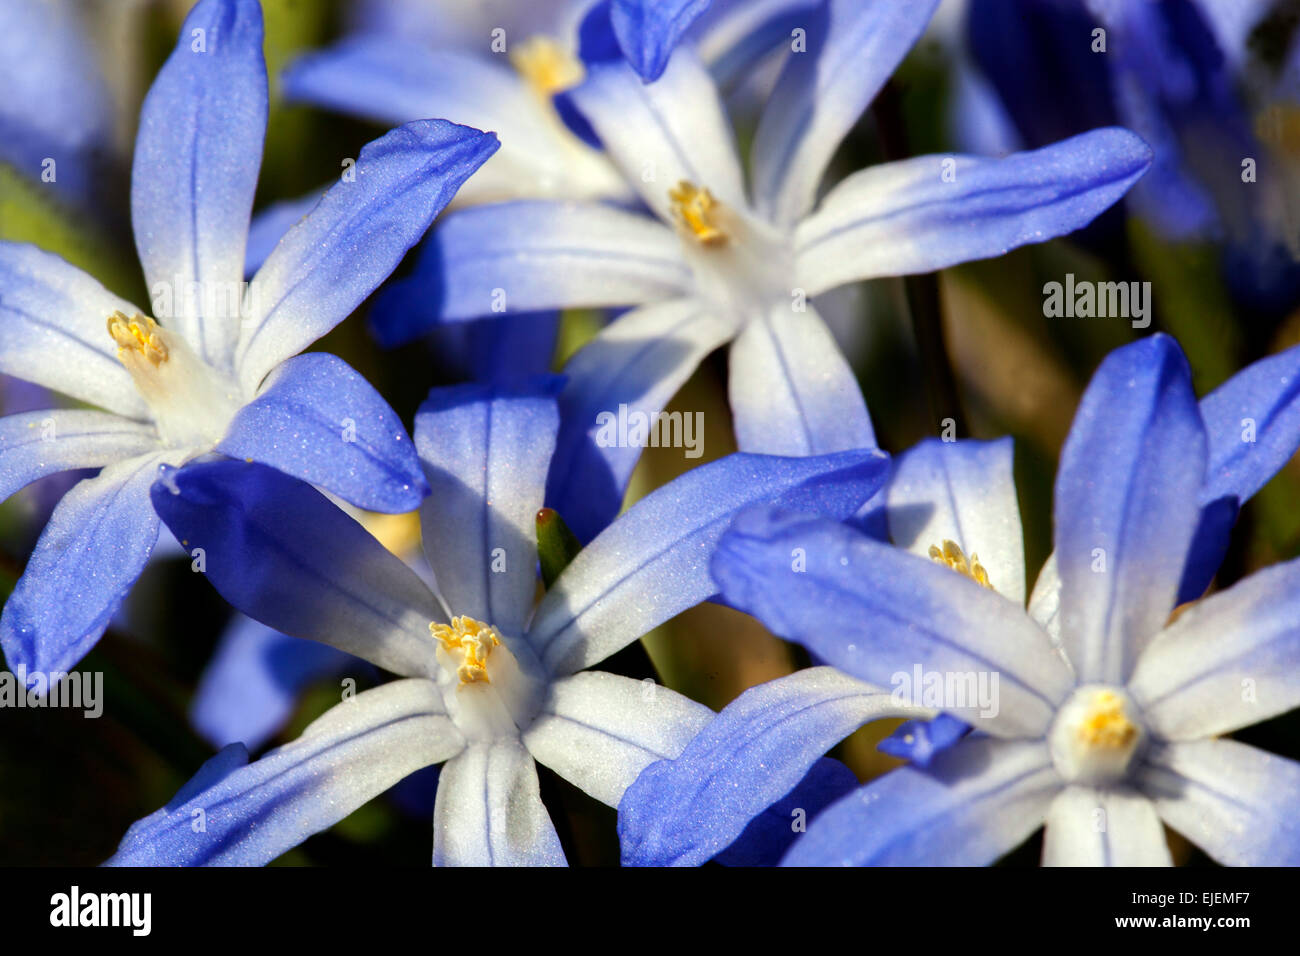 Glory of the Snow, Scilla luciliae, Chionodoxa luciliae, early spring flowers White blue flower Stock Photo